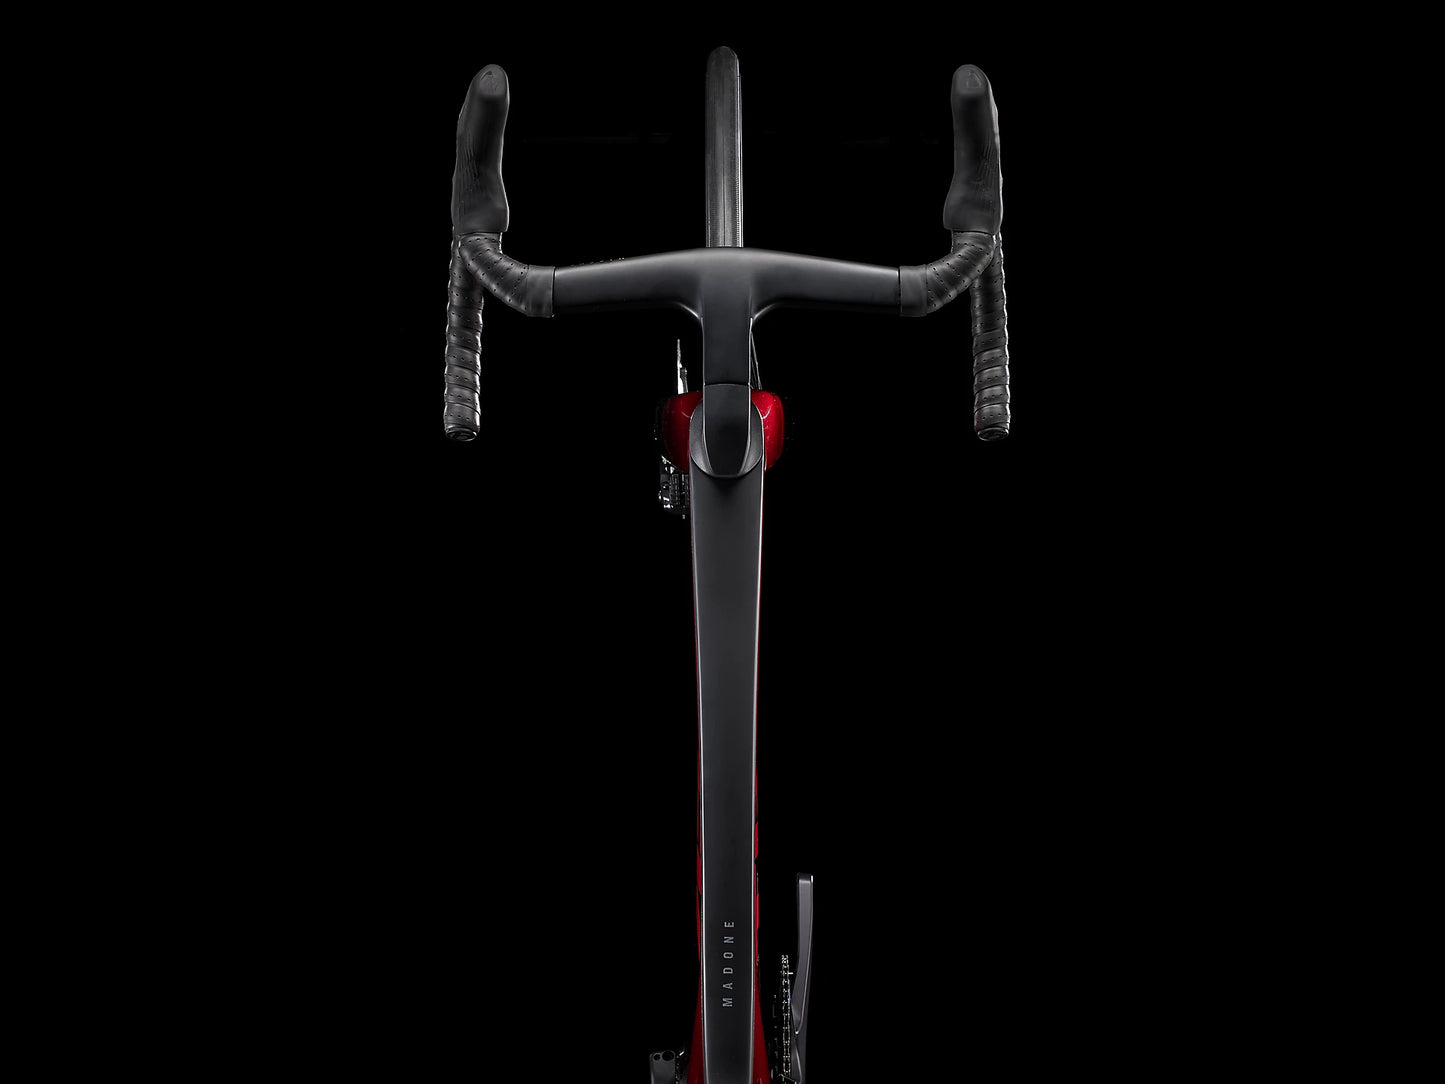 Madone SLR 7 Gen 7 Red to Red Carbon